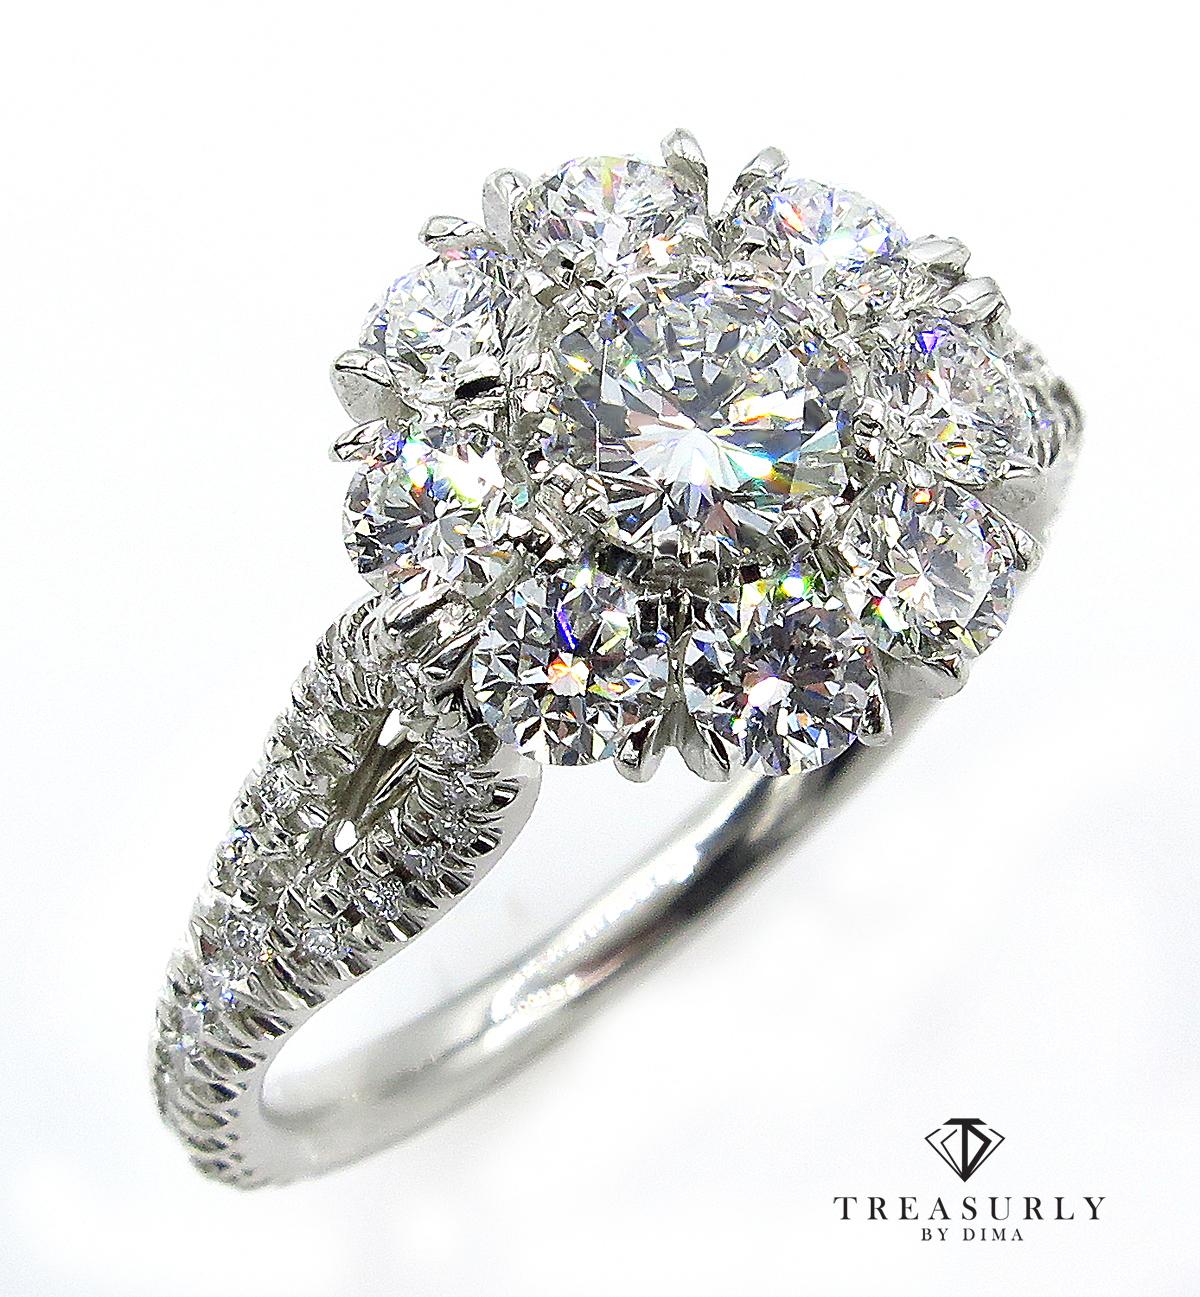 A supreme and stunning sparkler artfully crafted in Platinum setting.
The ring is 12mm in Diameter!
This dramatic and dynamic, uniquely Fabulous vintage diamond ring explodes in a blaze of bright white diamonds weighing 3.20 carats total (